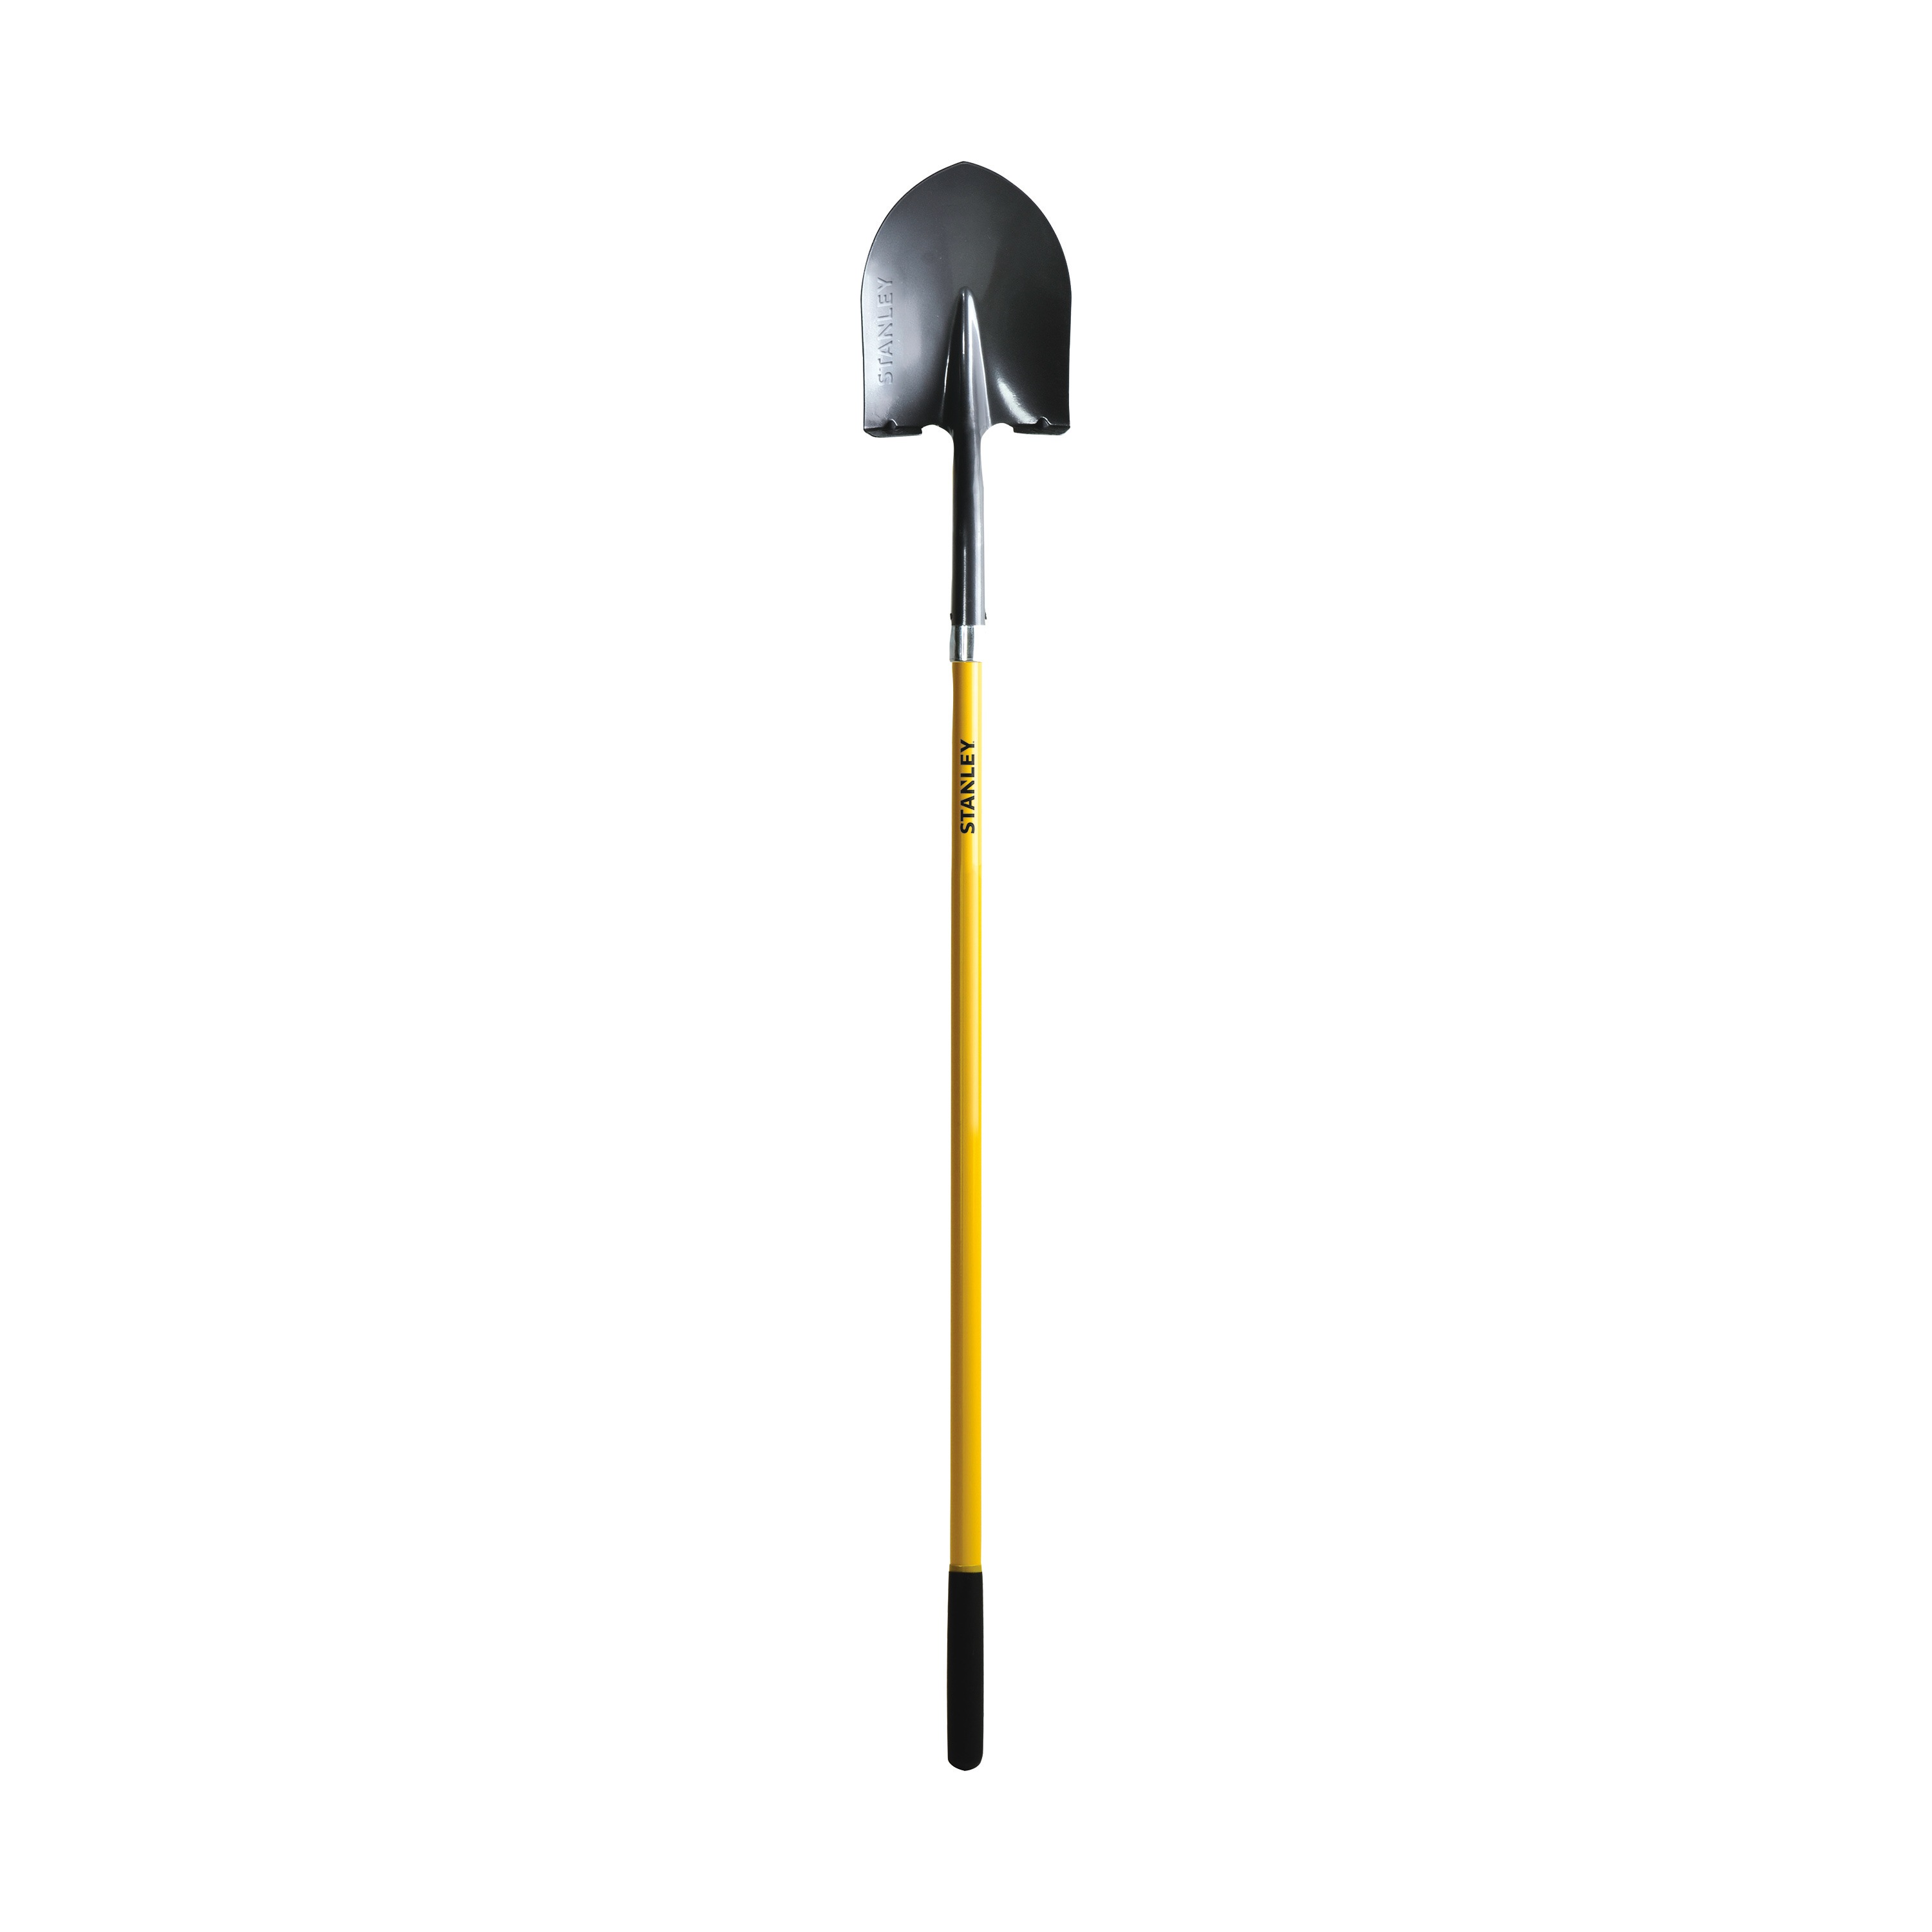 Stanley Tools - ACCUSCAPE PROSERIES Contractor Grade Round Point Shovel - BDS6458